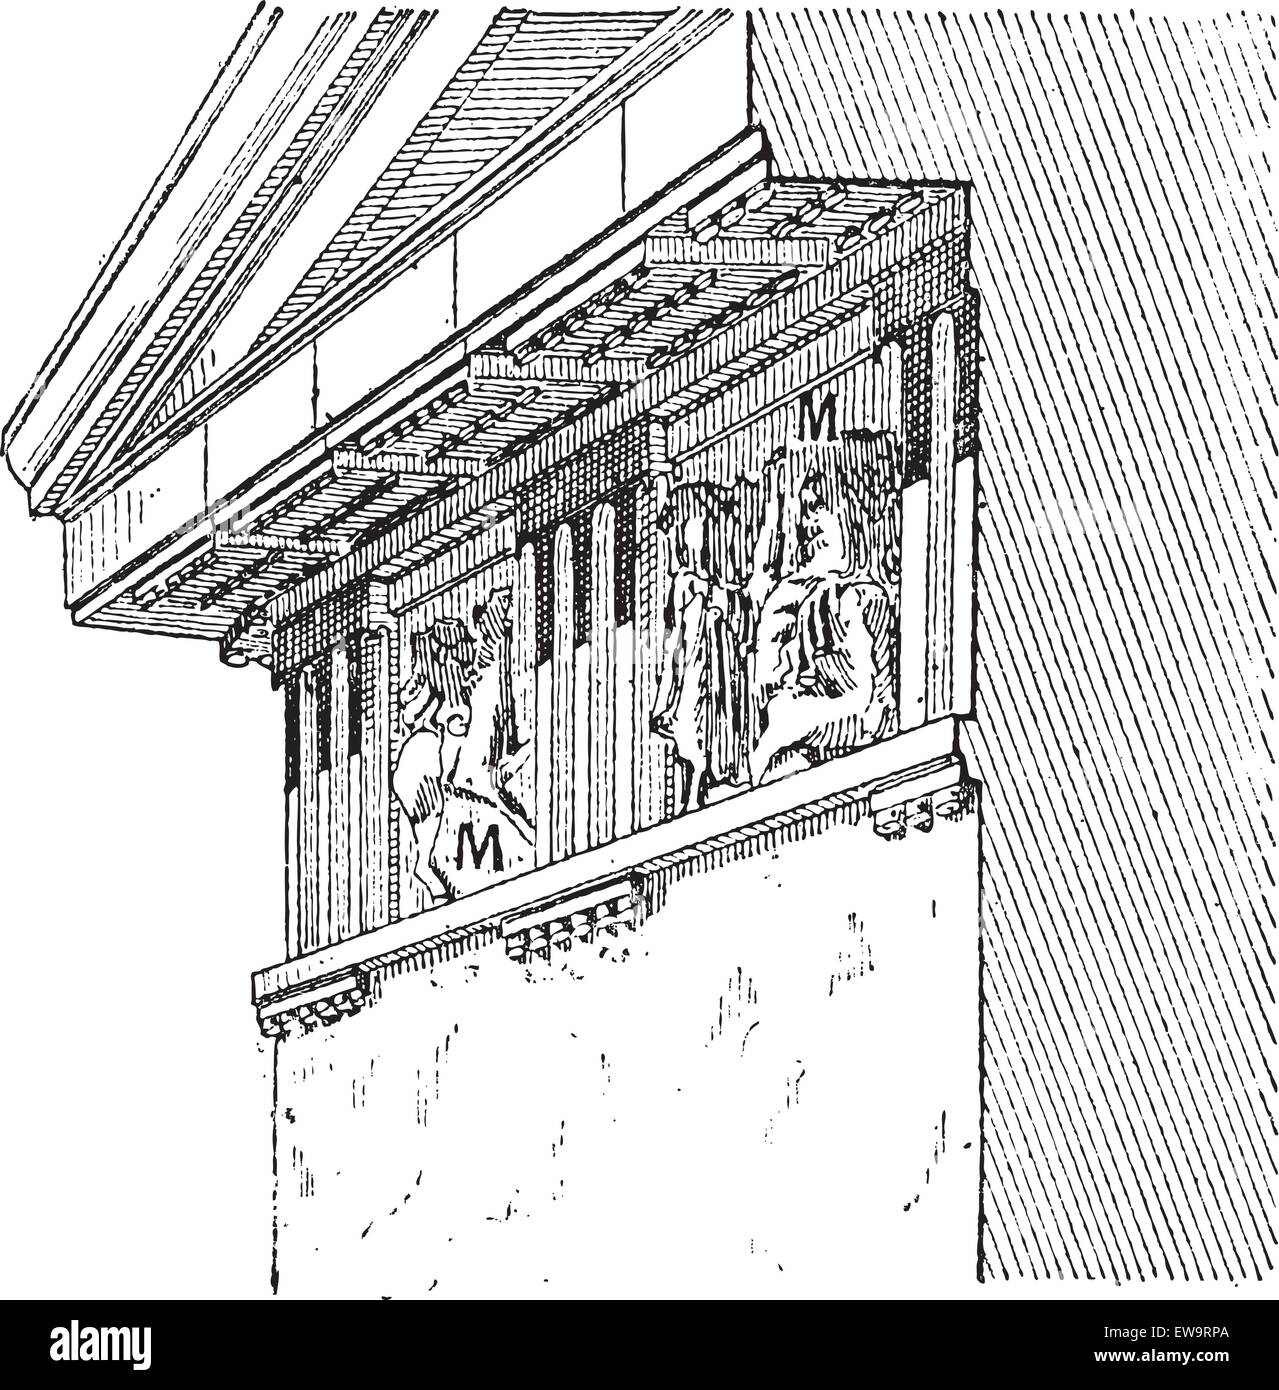 Metope, in Architecture, at the Parthenon, in Athens, Greece, vintage engraved illustration. Dictionary of Words and Things - Larive and Fleury - 1895 Stock Vector